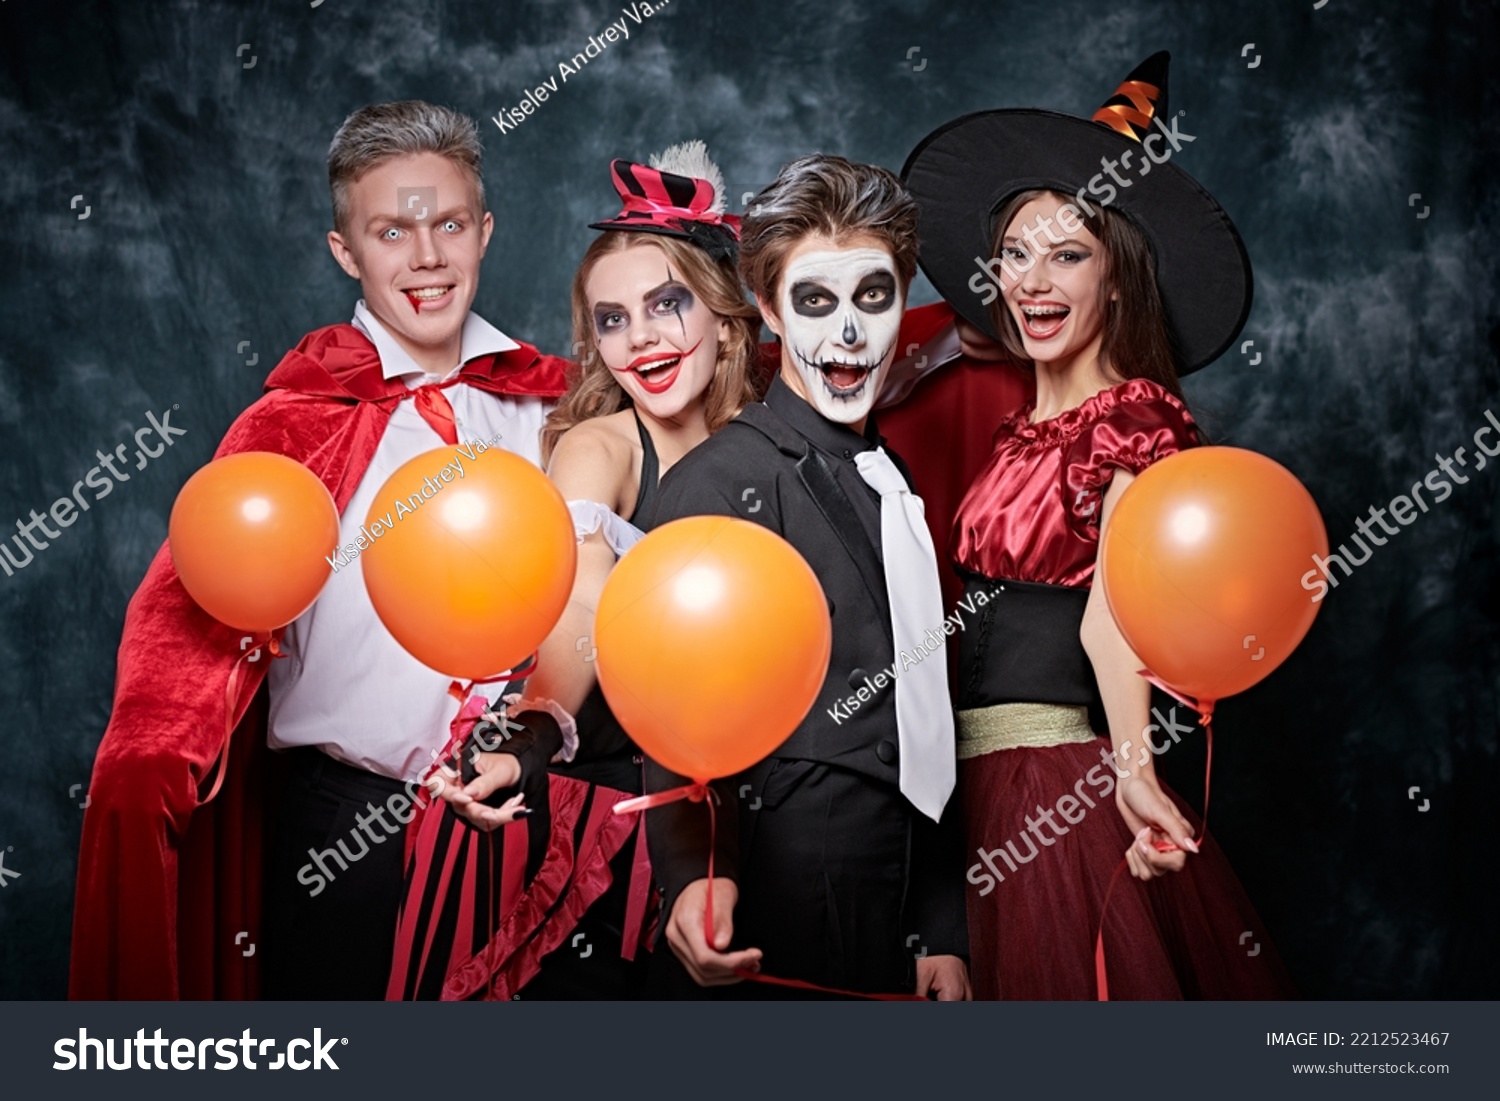 Merry Halloween party. Teenage friends in carnival costumes have fun celebrating Halloween. Skeleton, witch, clown and vampire. Studio portrait on vintage background. #2212523467